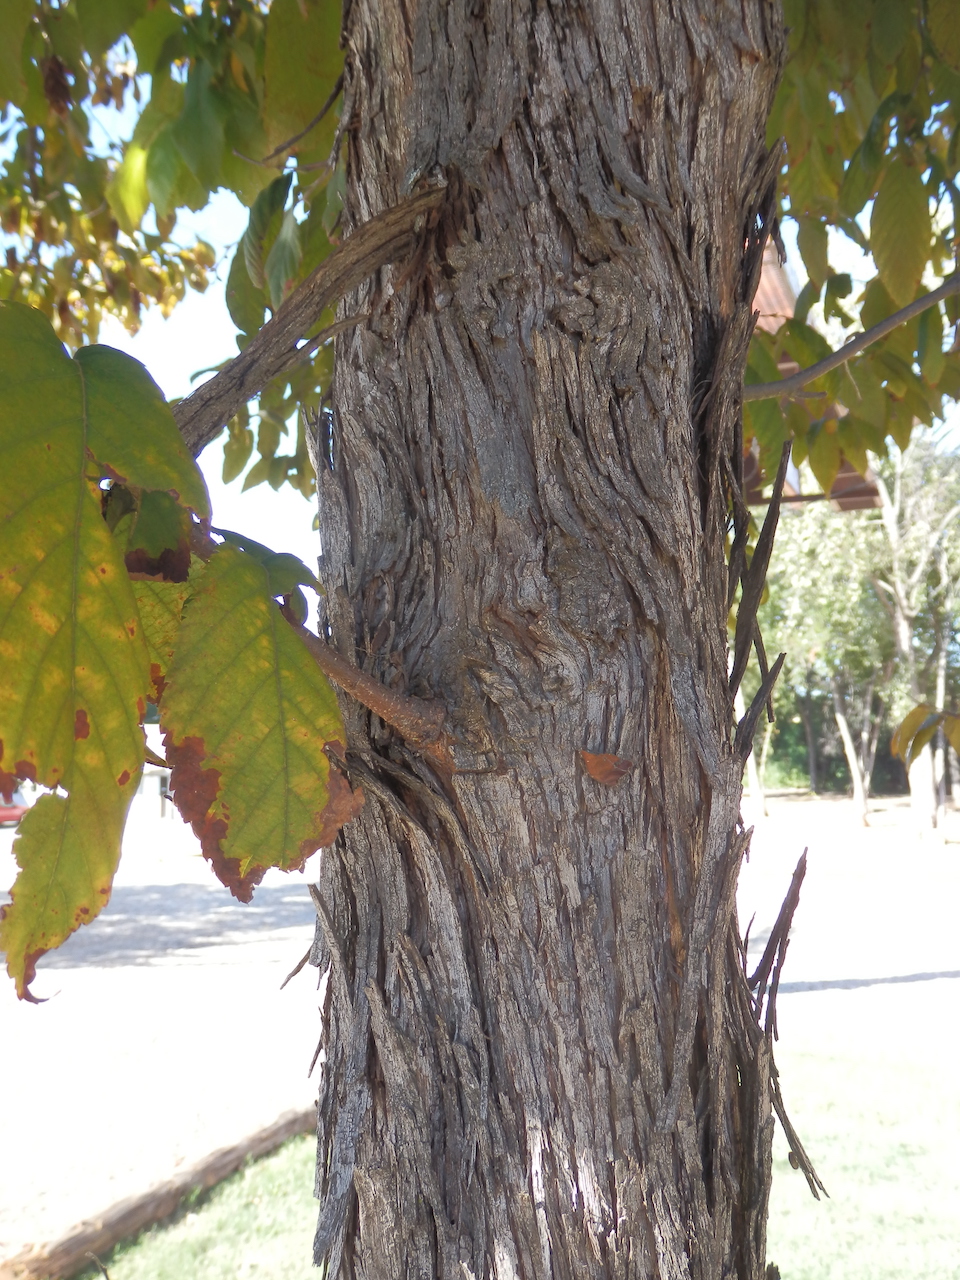 The Scientific Name is Ostrya virginiana. You will likely hear them called American Hop-hornbeam, Eastern  Hop Hornbeam. This picture shows the Bark that has long and narrow vertical plates that are loose and shaggy on the ends -